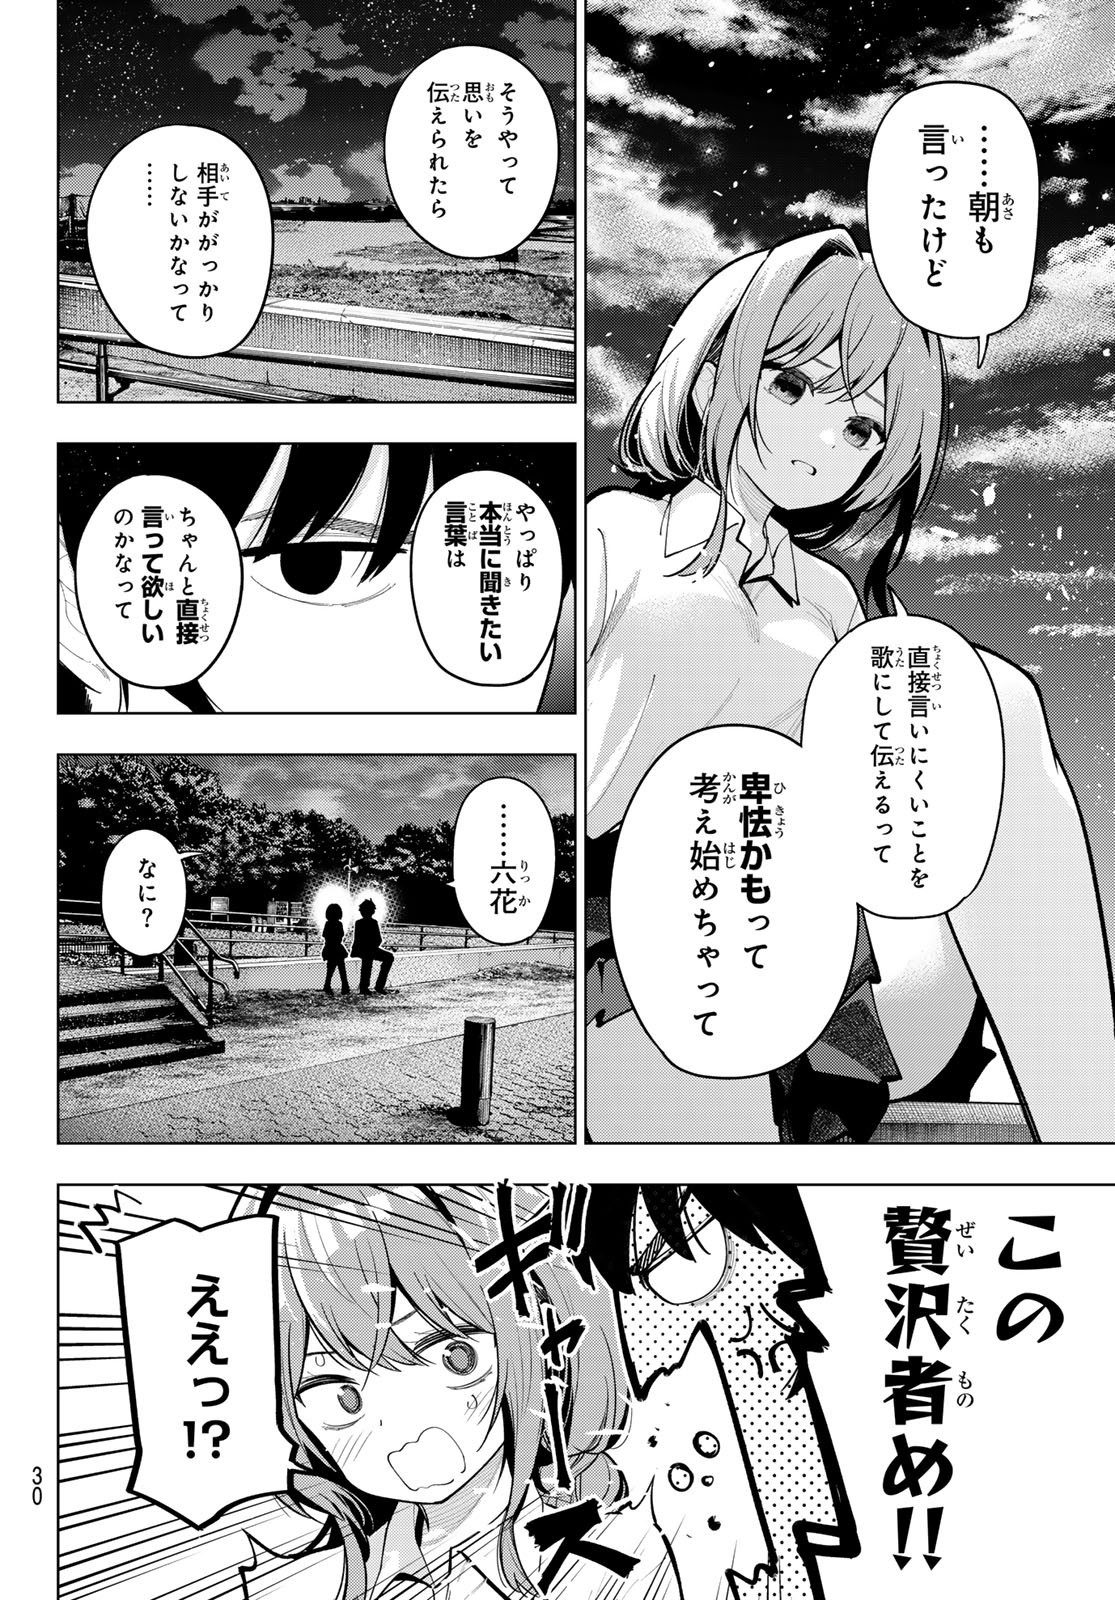 Weekly Shōnen Magazine - 週刊少年マガジン - Chapter 2024-23 - Page 28